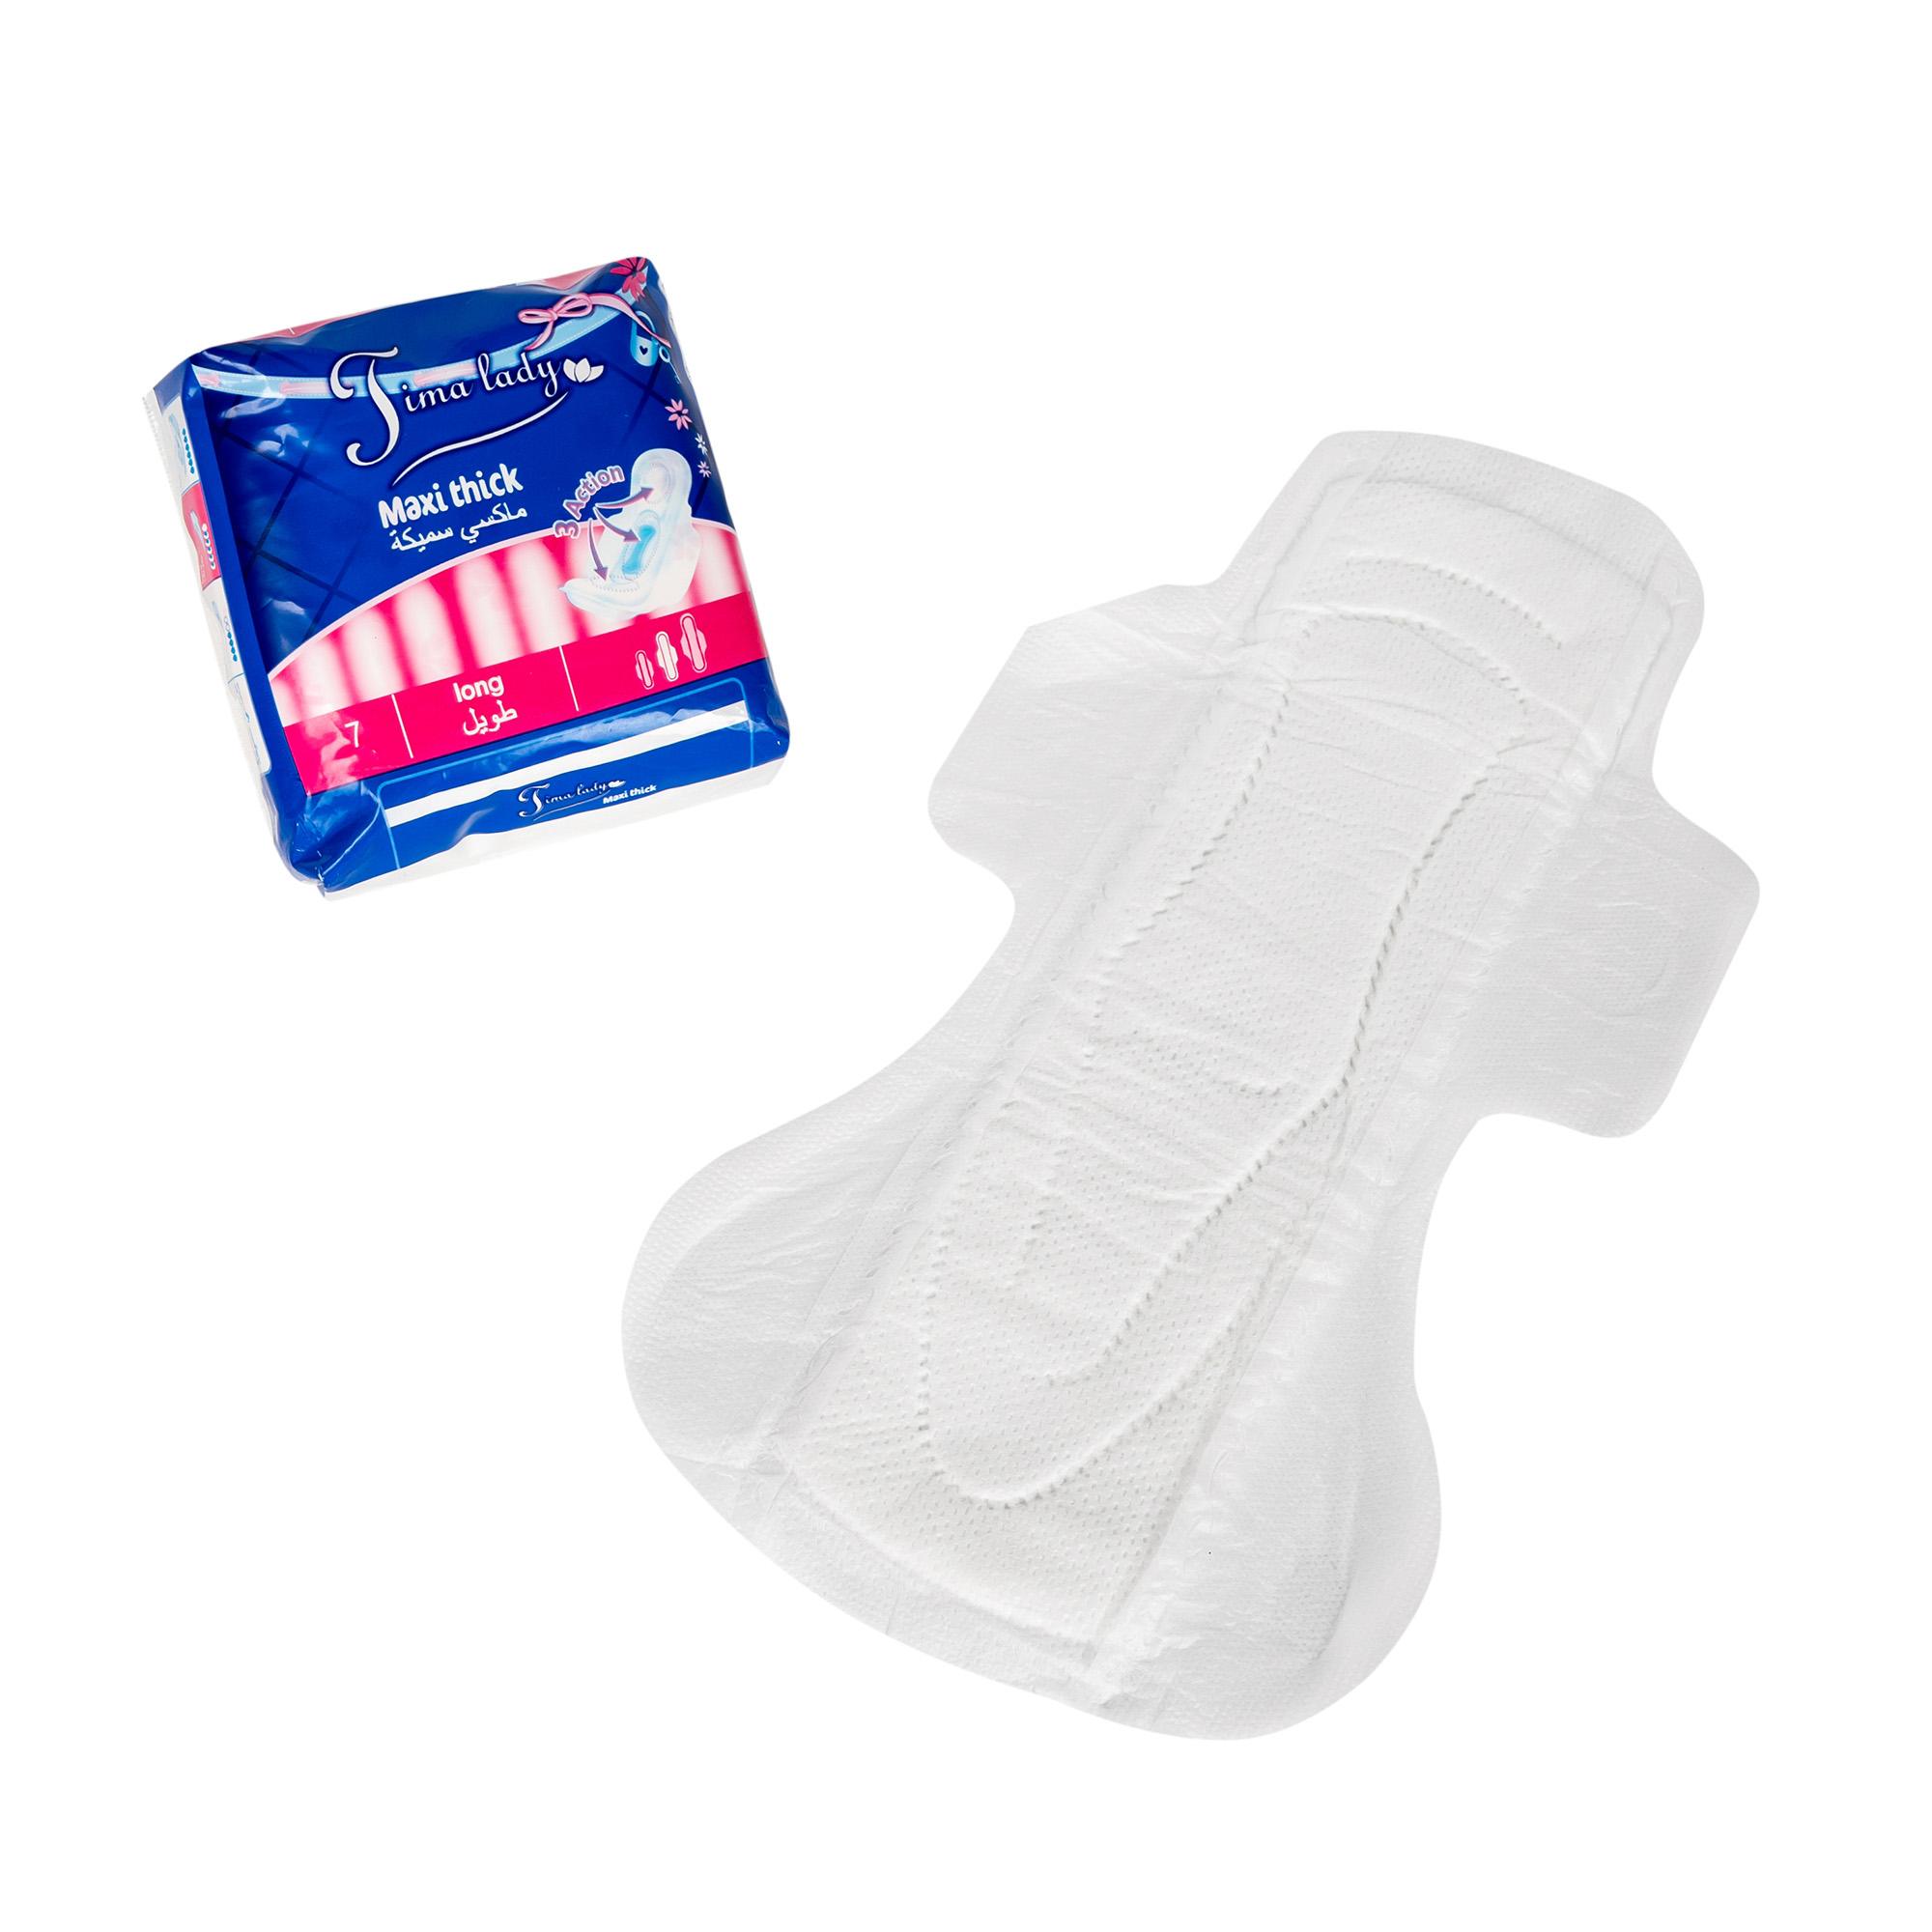 What to consider when choosing a suitable sanitary napkin	